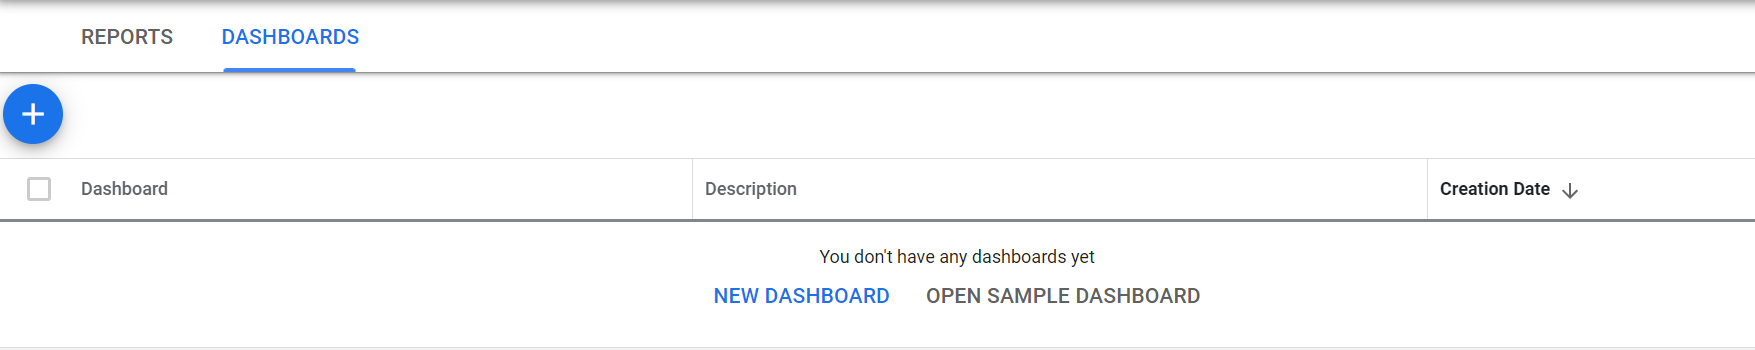 Homepage for MCC-level dashboards created in Google Ads.